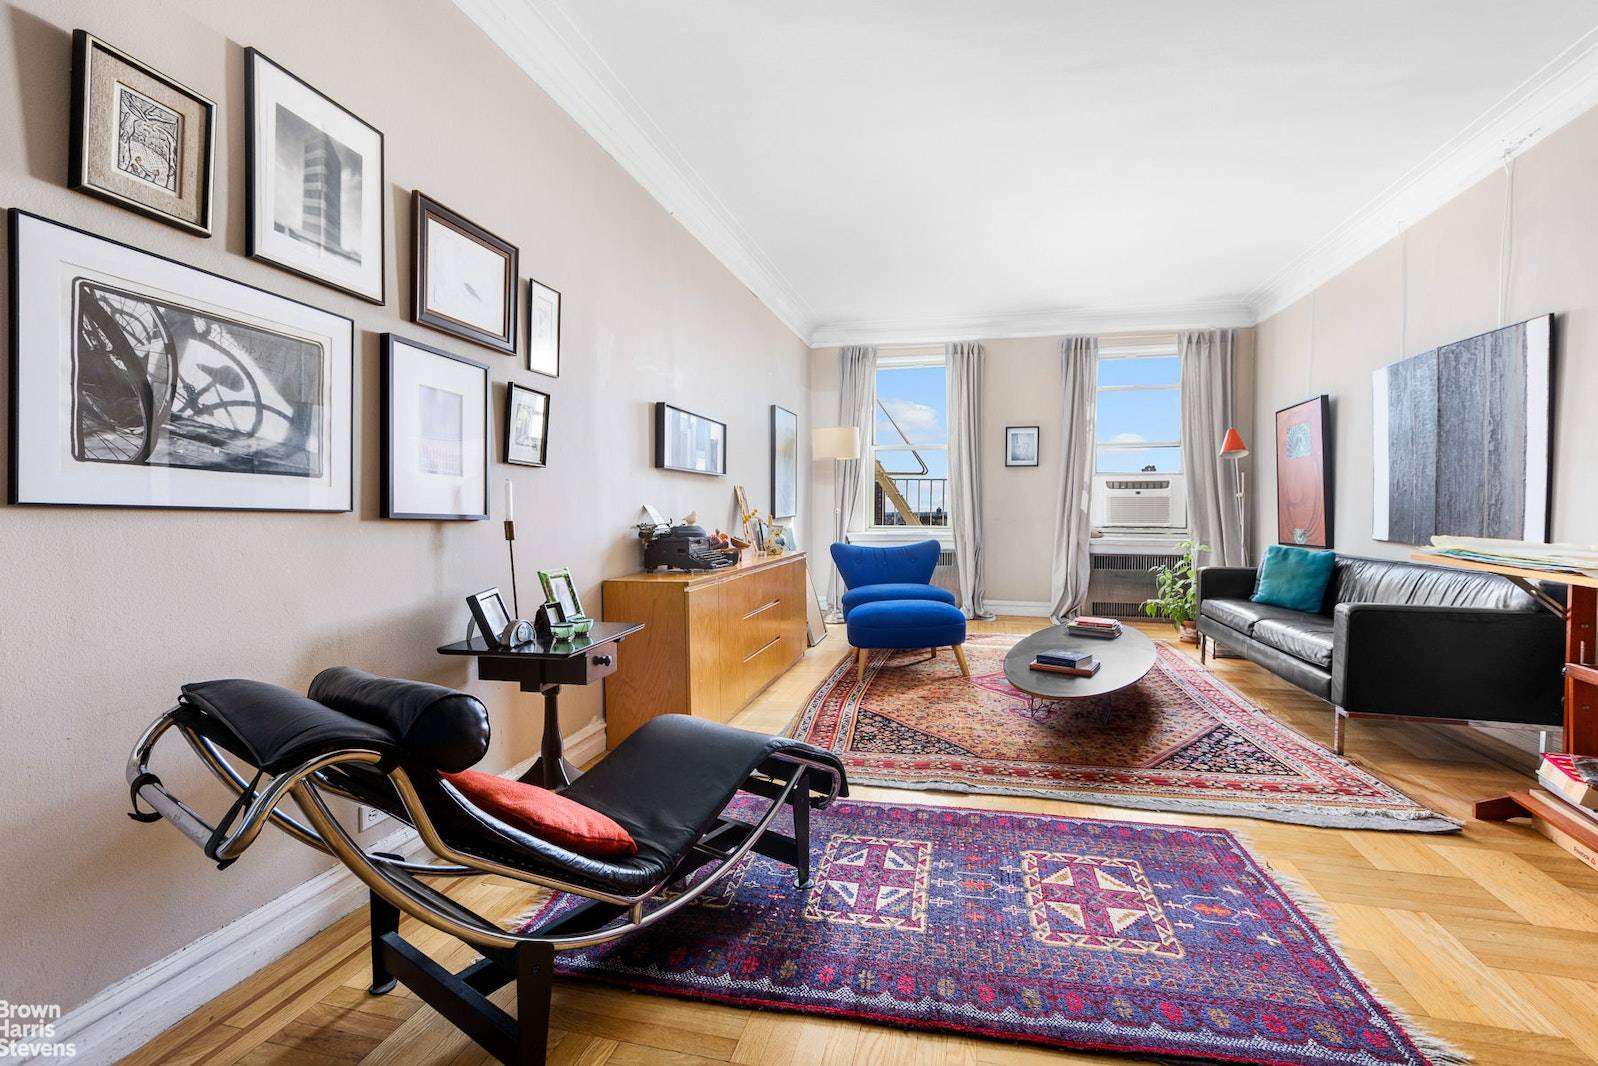 Art Deco details abound in this super quiet TOP FLOOR large two bedroom two bath apartment with high ceilings, graceful arches, and tons of prewar charm.